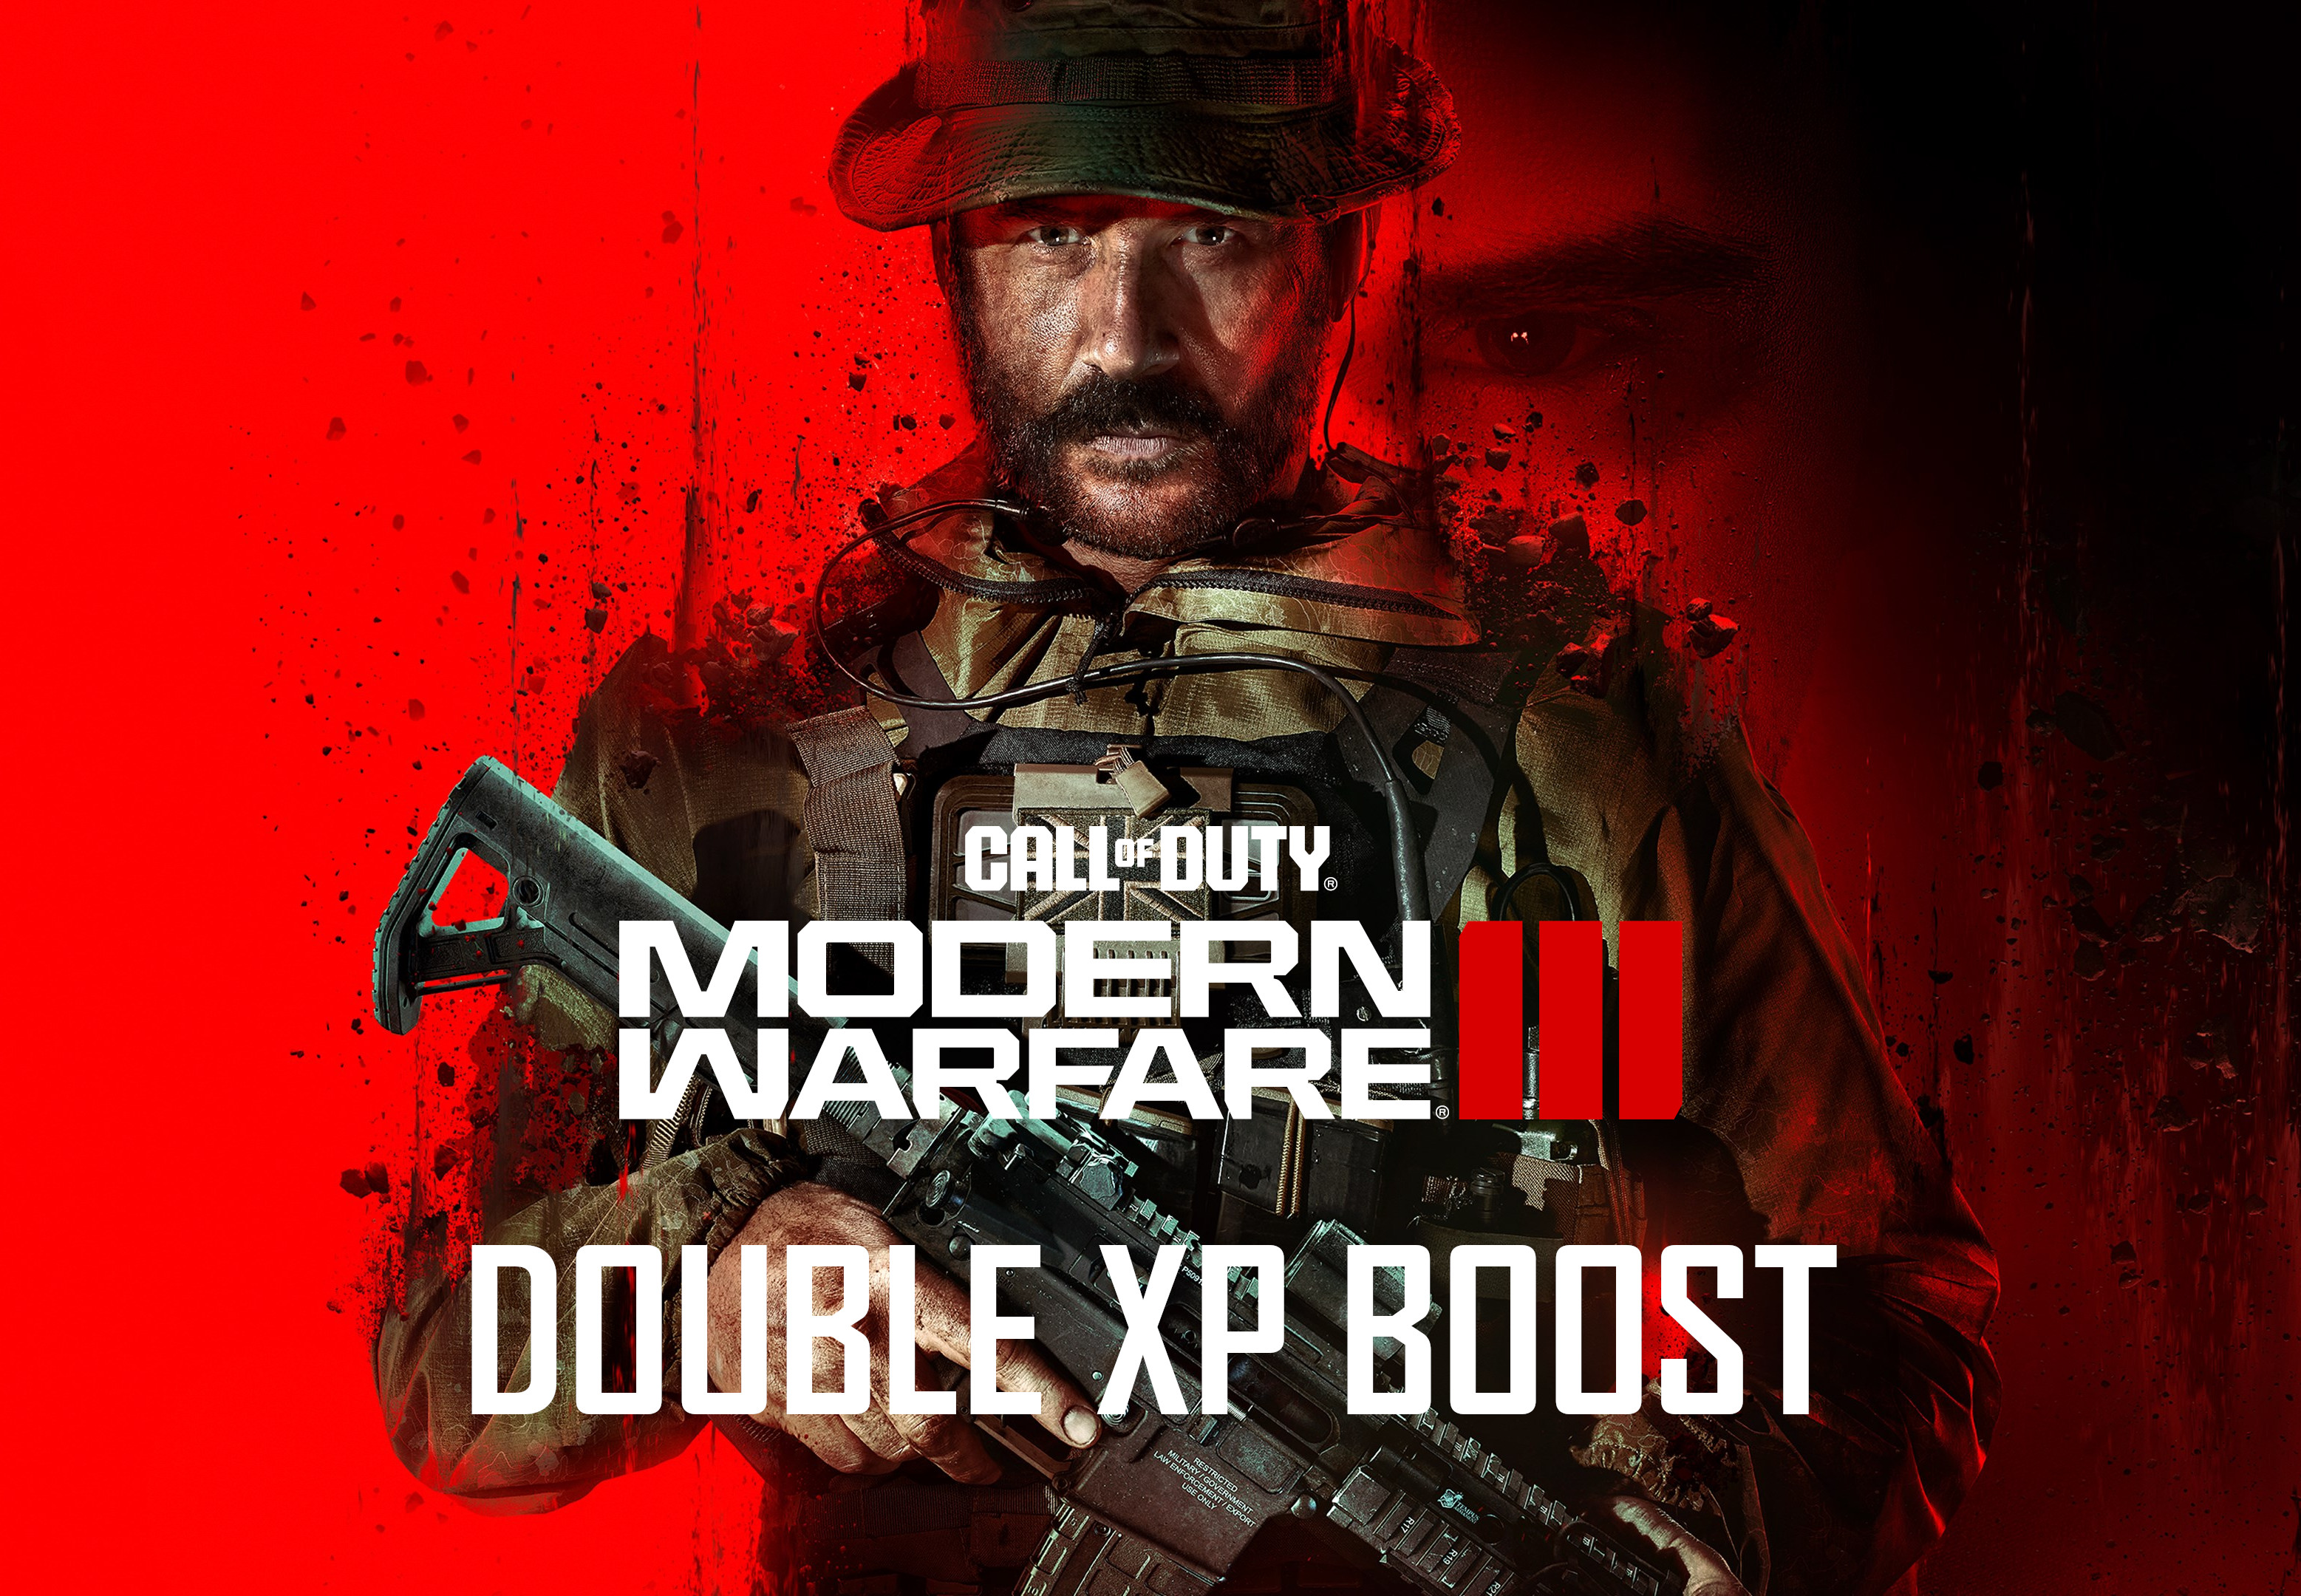 Call Of Duty: Modern Warfare III - 3 Hours Double XP Boost PC/PS4/PS5/XBOX One/Series X,S CD Key